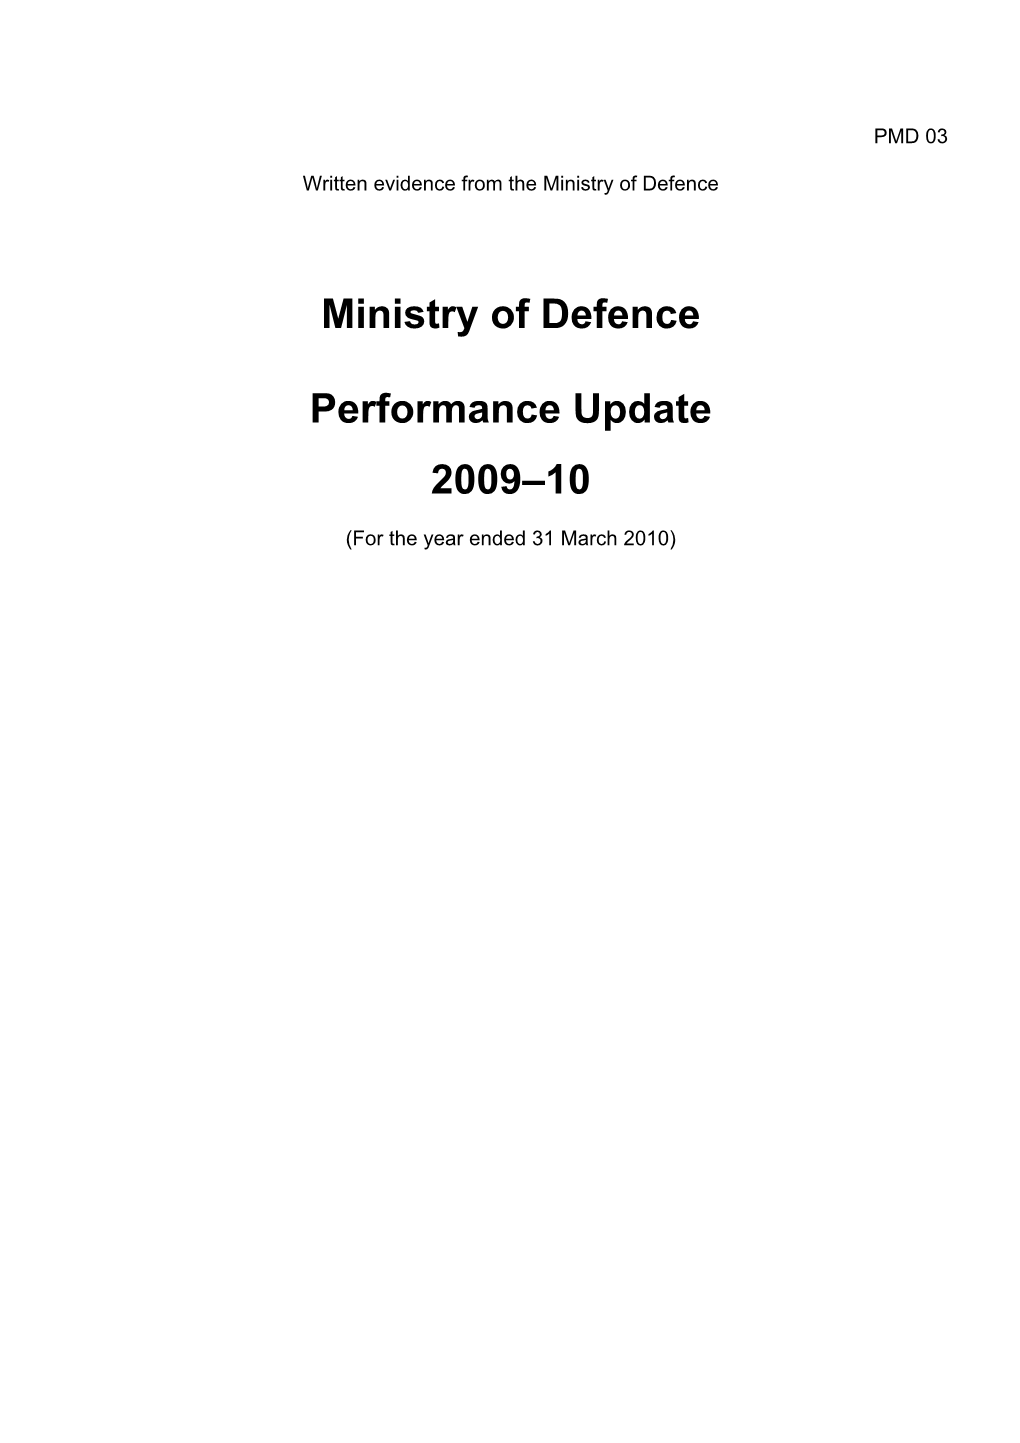 Ministry of Defence Performance Update 2009–10